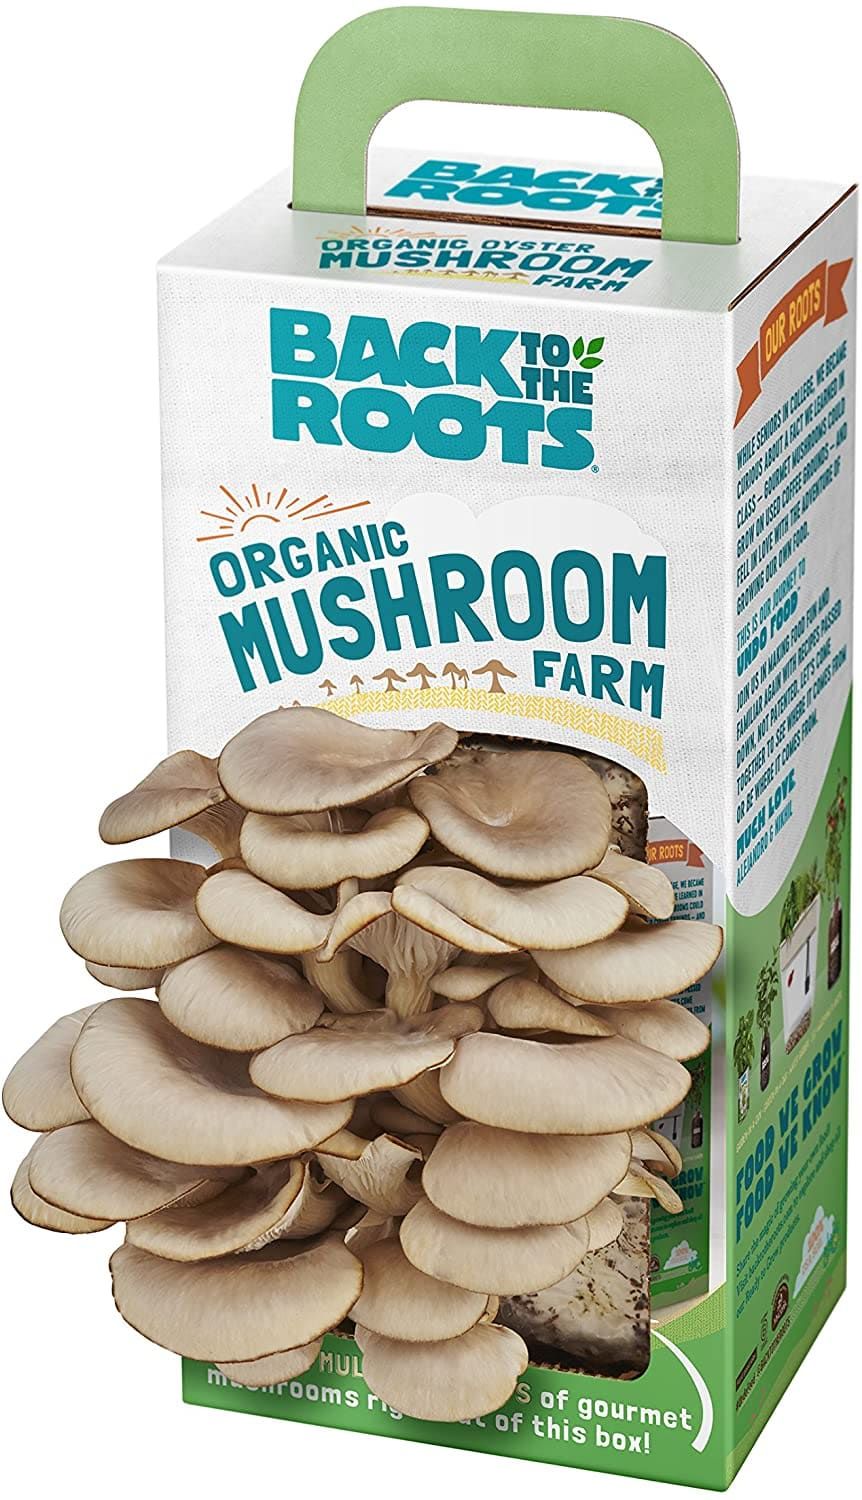 Back To The Roots Oyster Mushroom Growing Kit - $$title$$